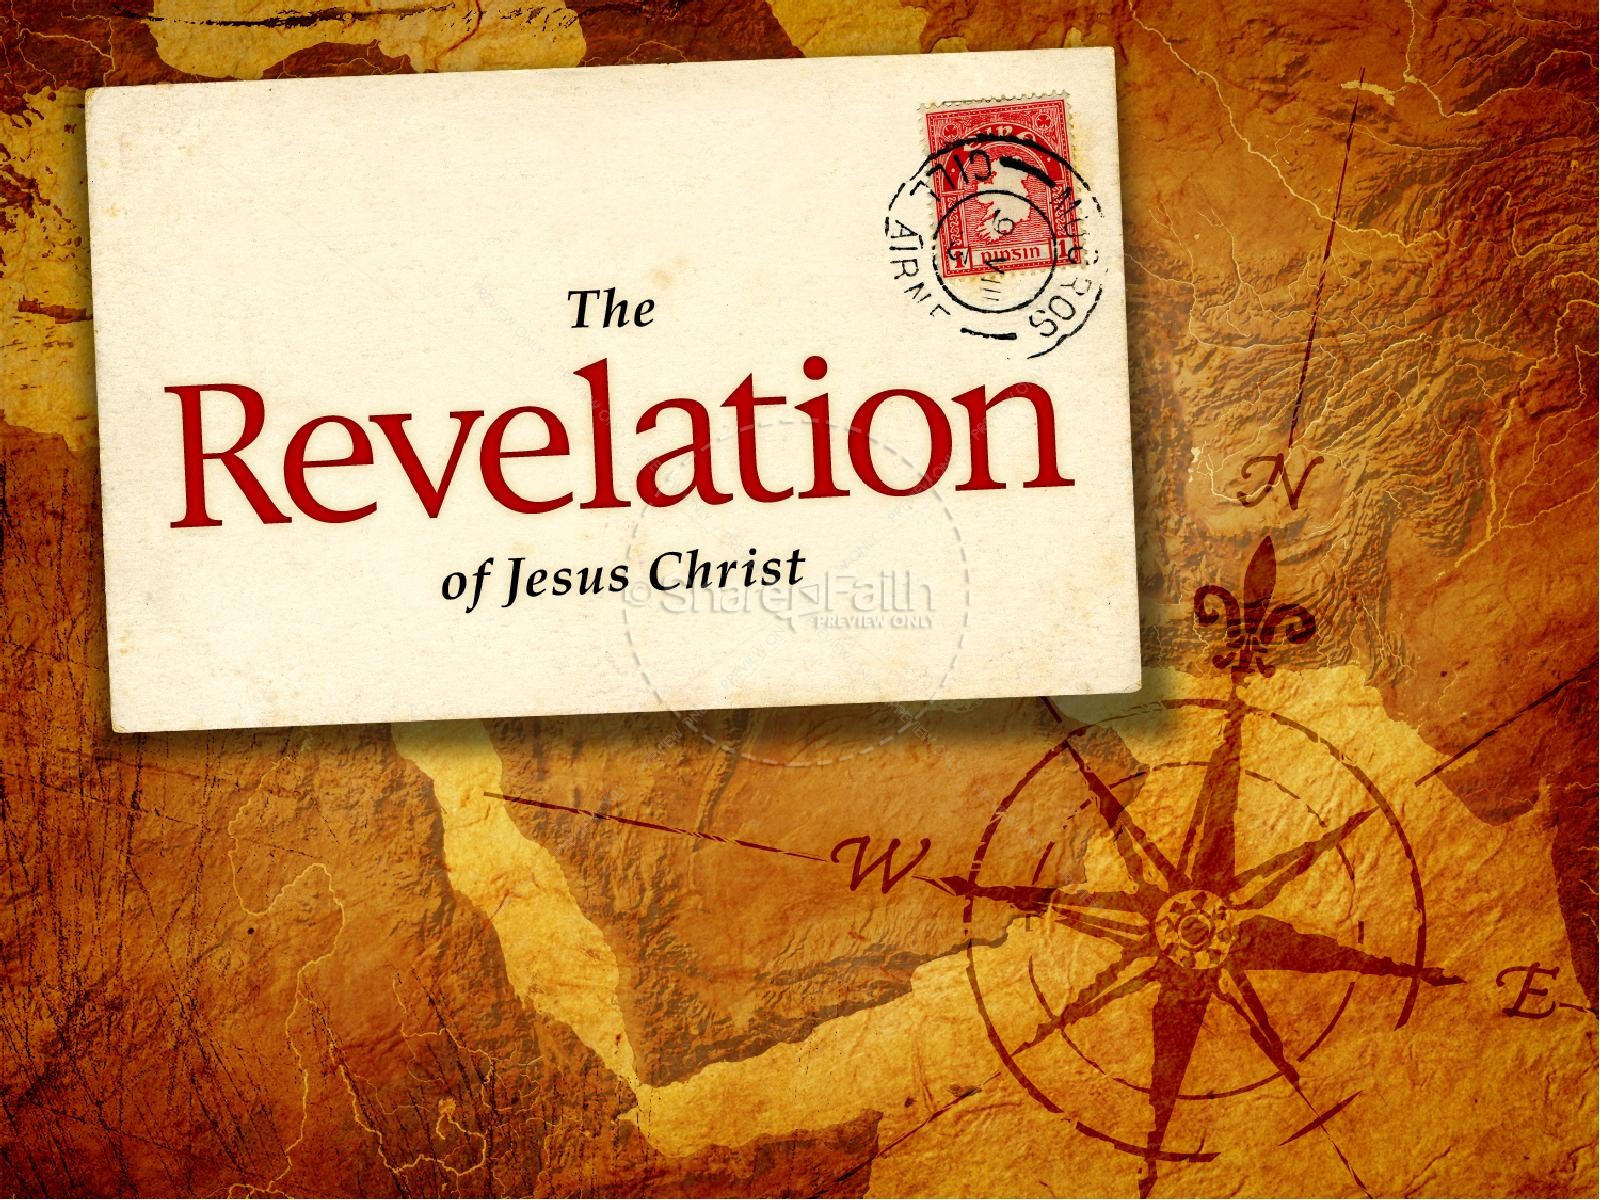 book of revelation clipart - photo #26